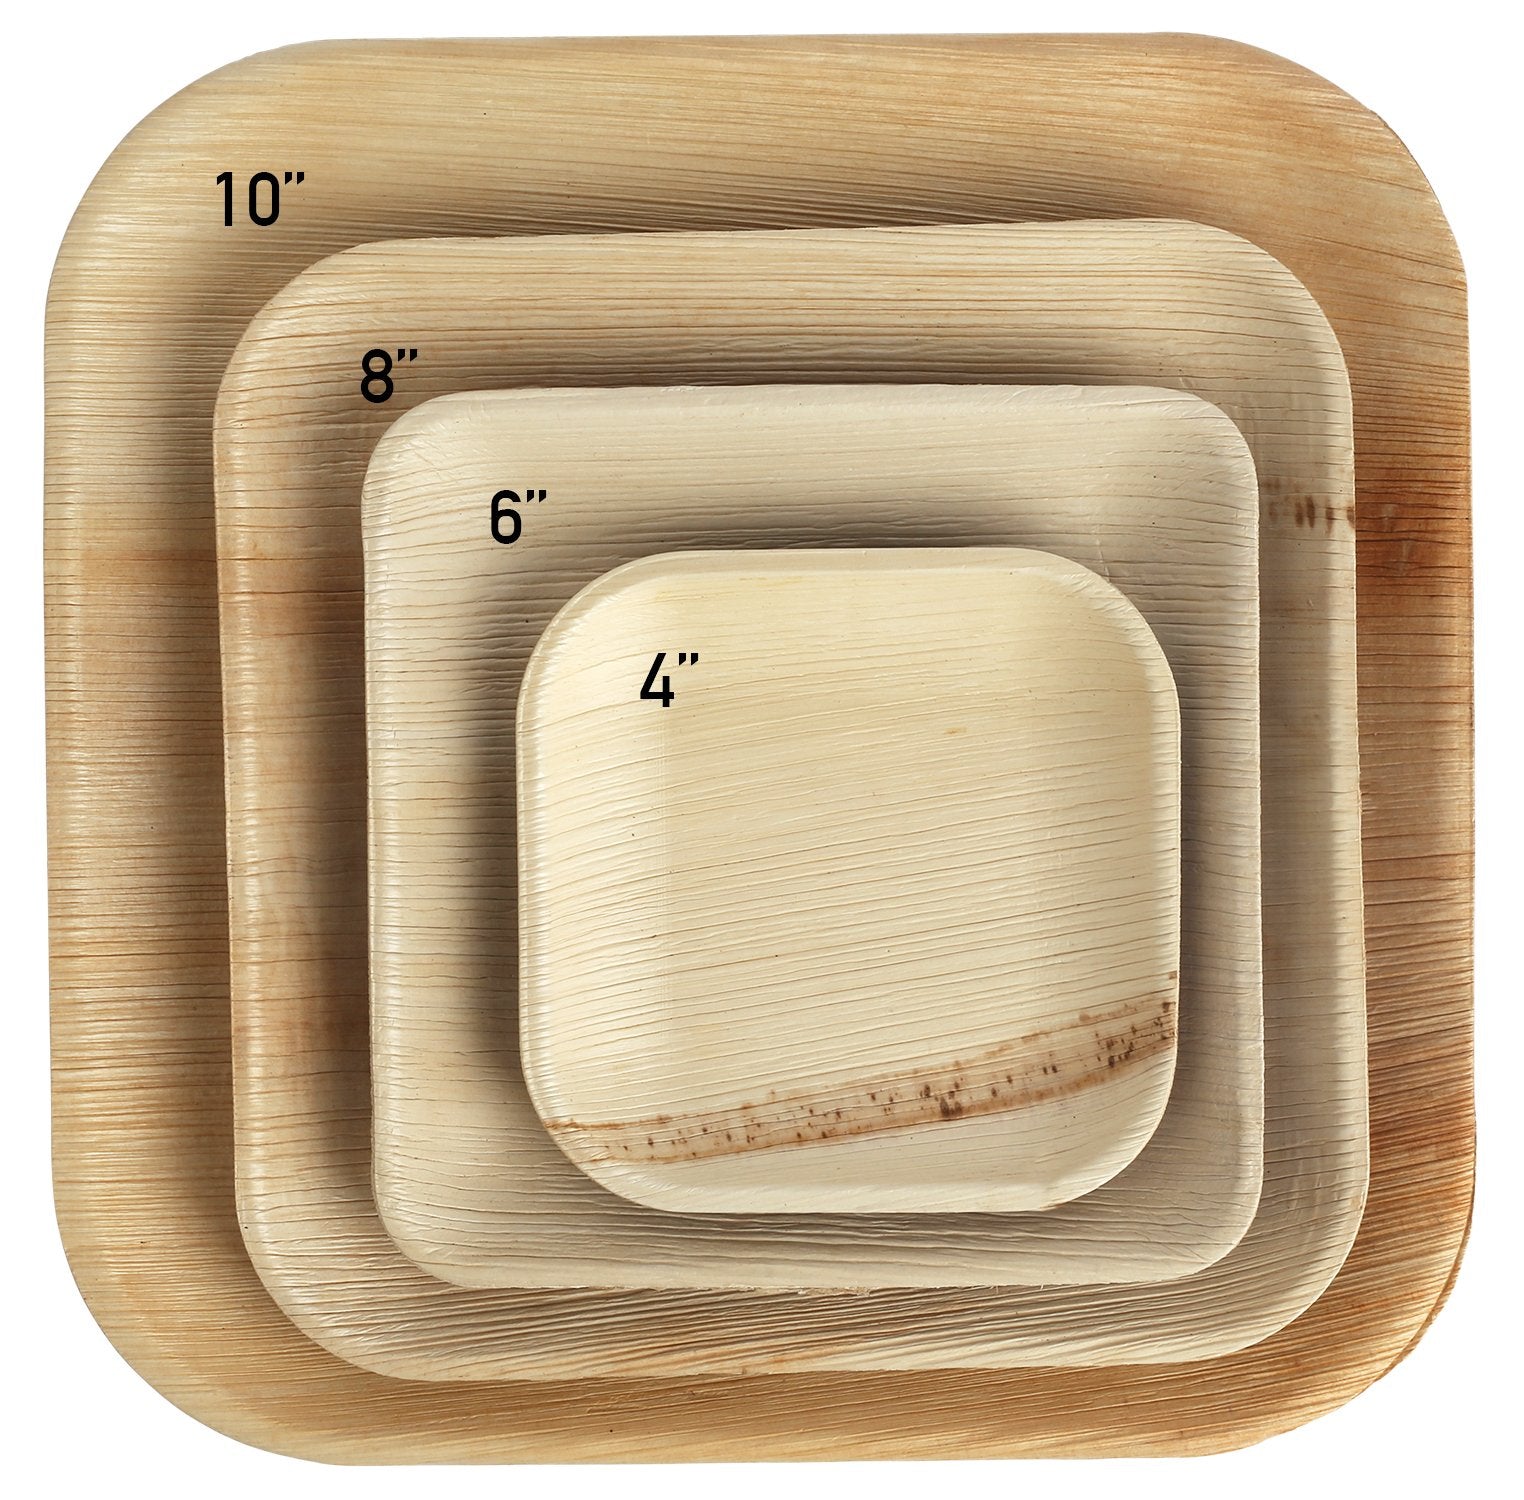 6" Square Salad Plates - Pack of 25